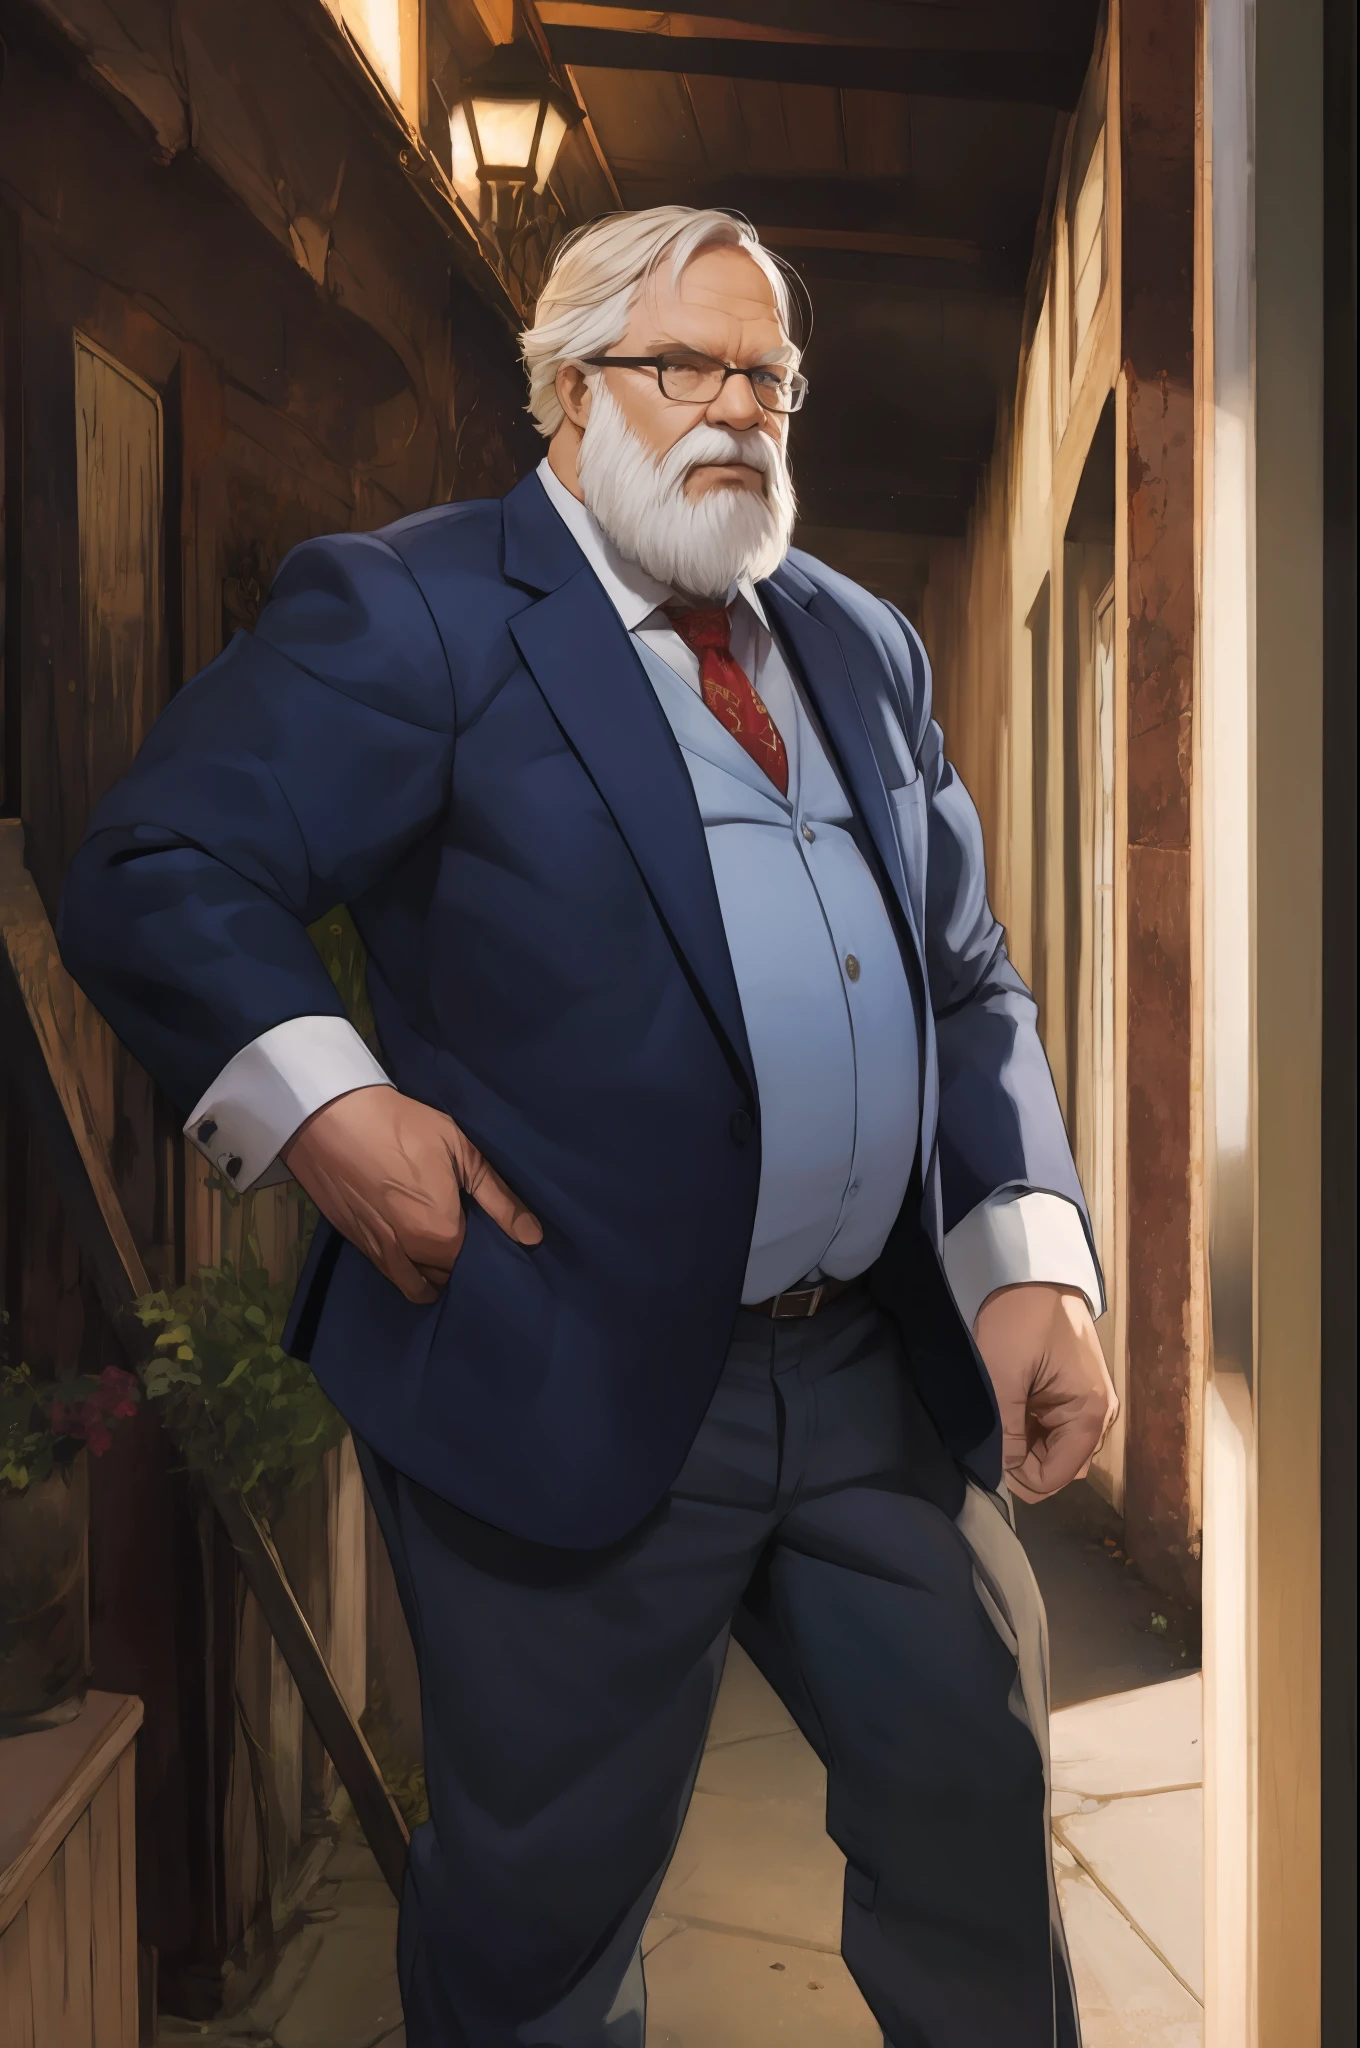 a old man standing, wearing suits